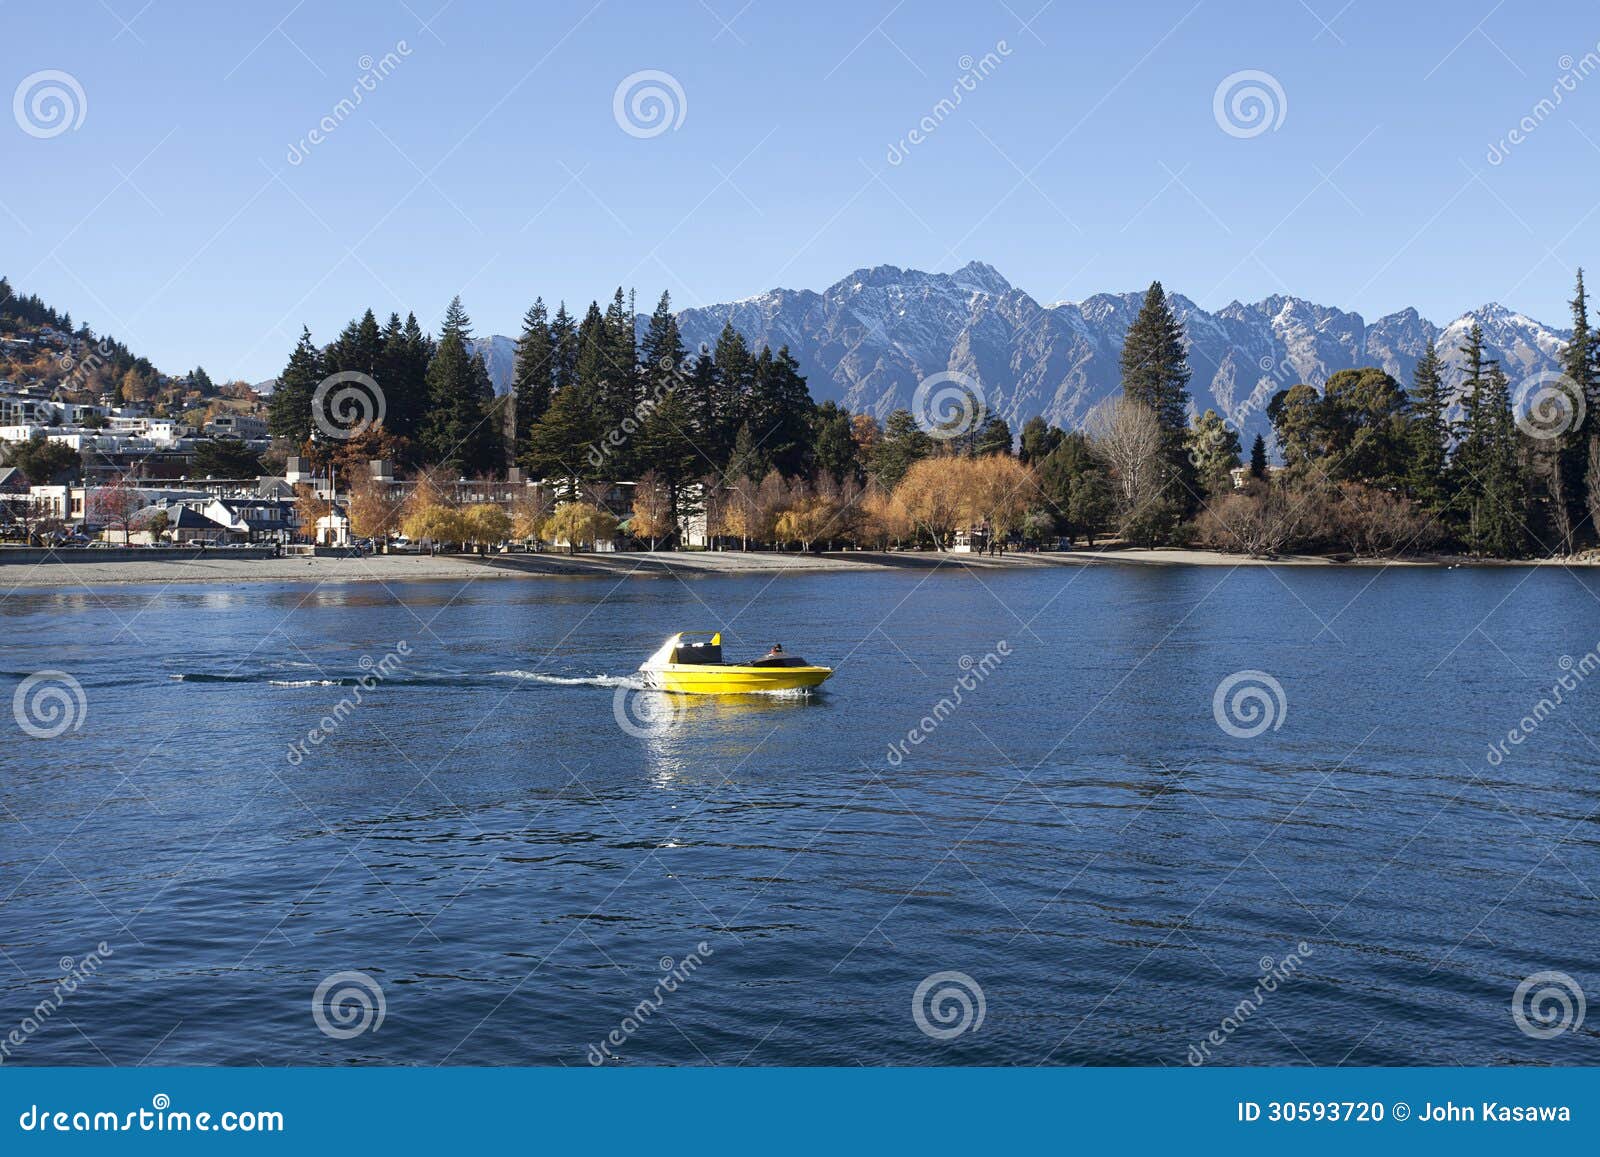 Speed boat and Beautiful Queenstown bay, New Zealand.